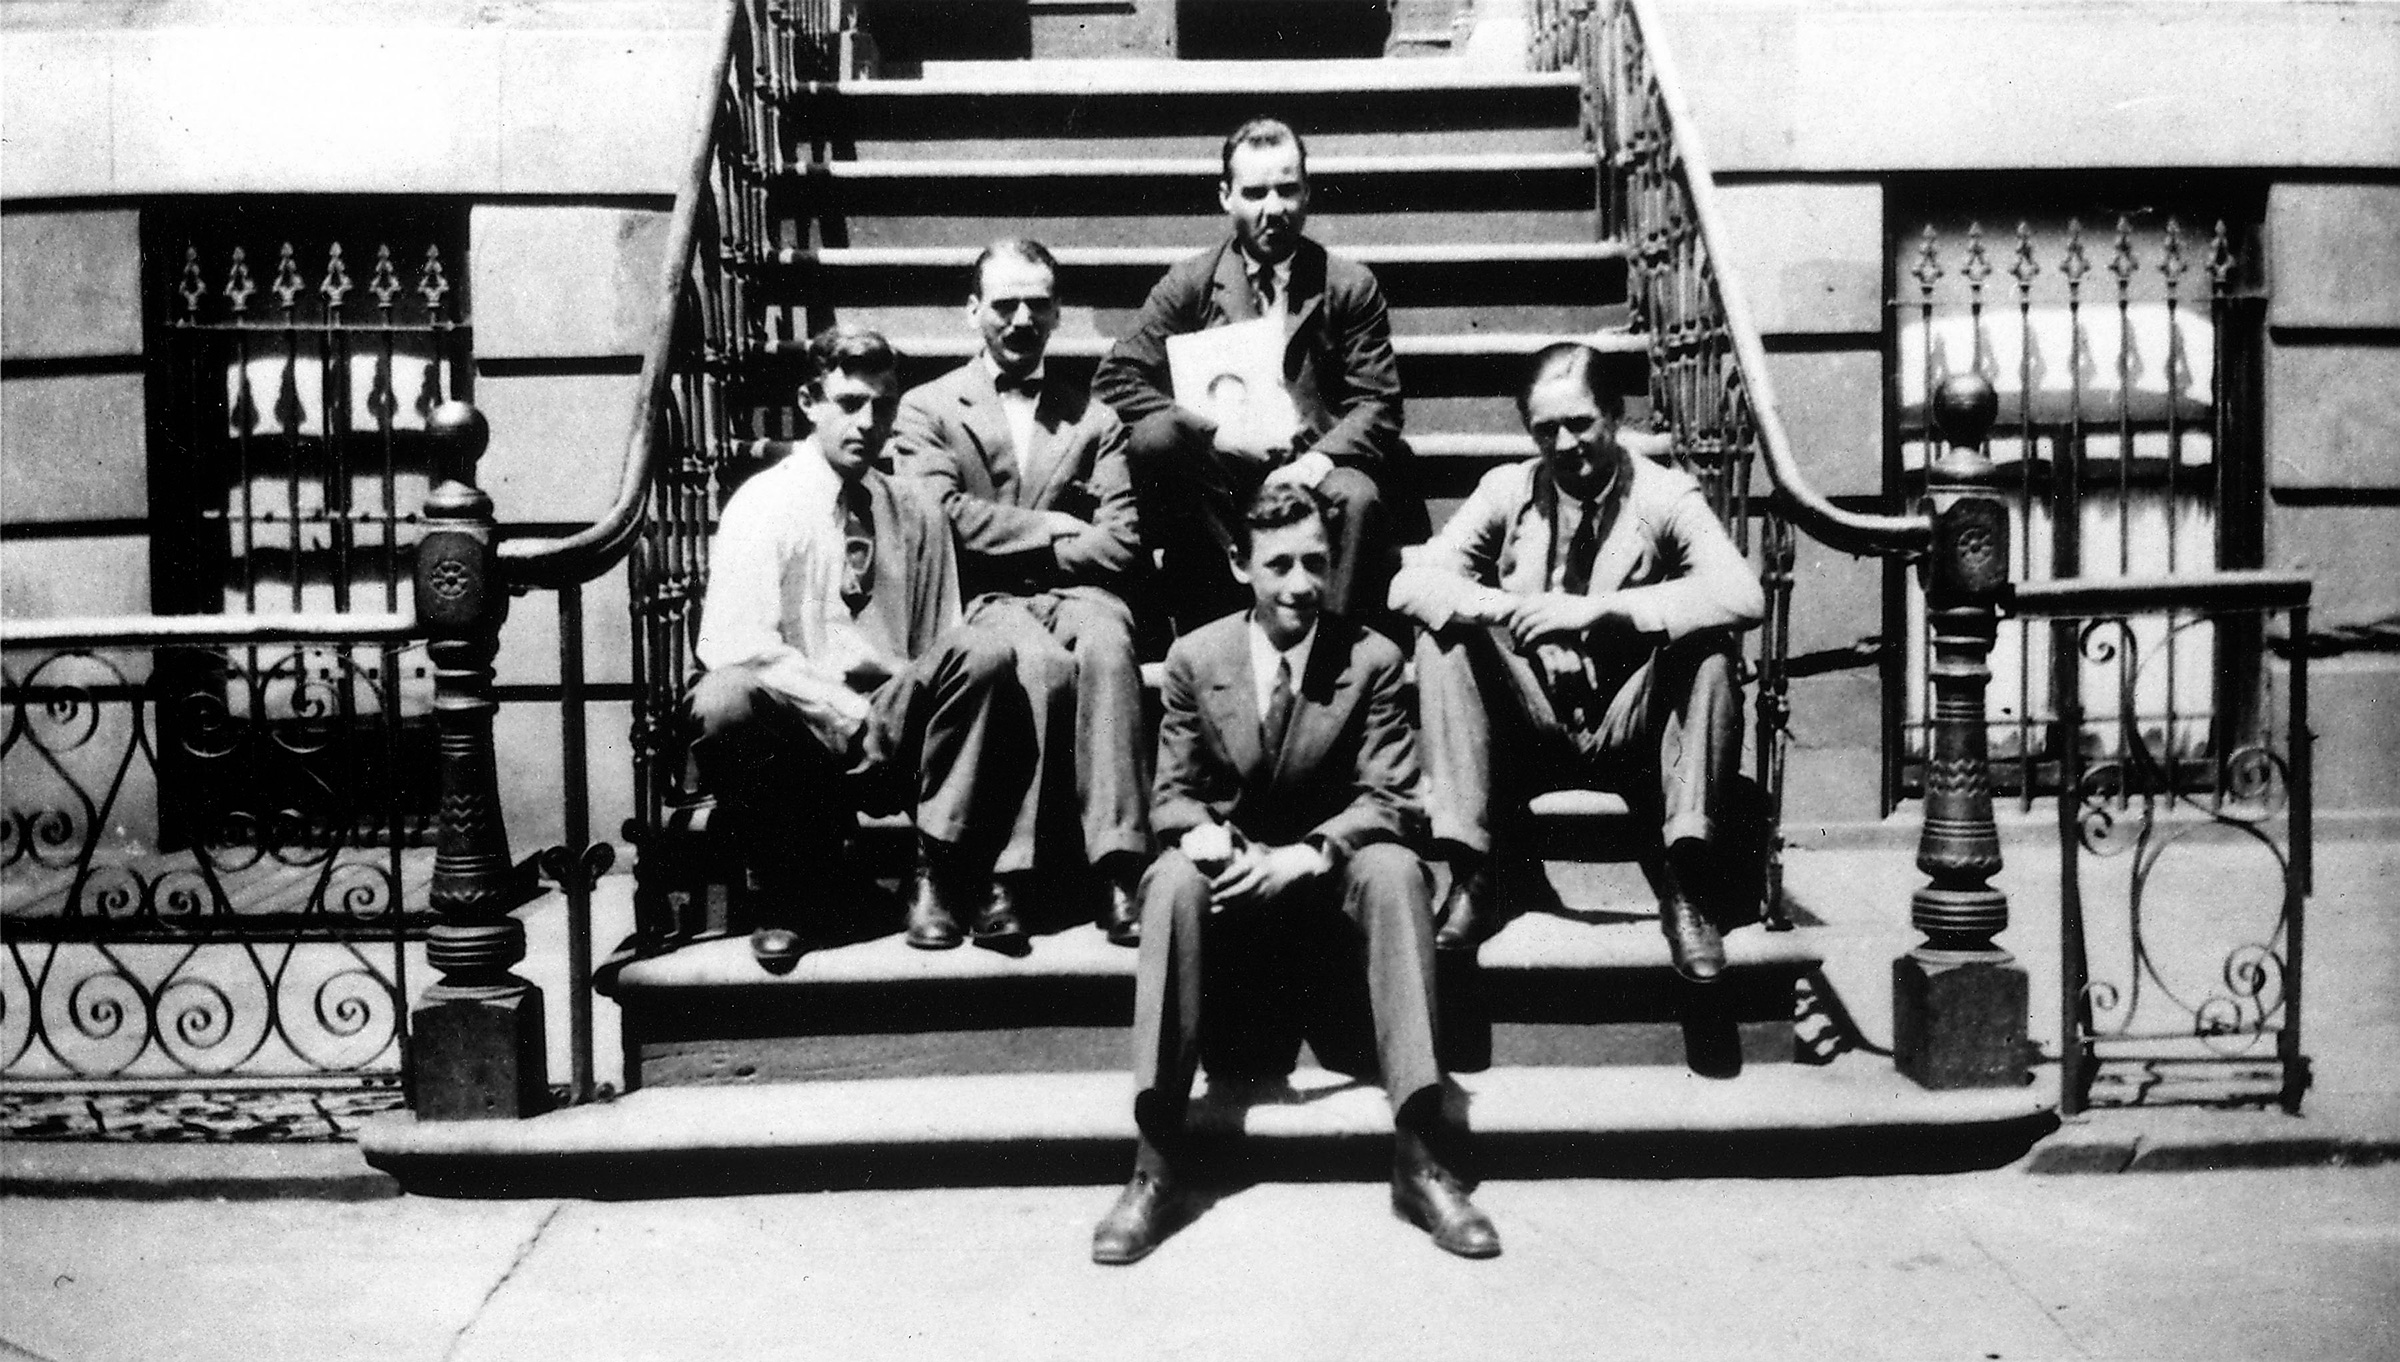 Early TIME magazine staffers outside the original building in New York City, circa 1924. Top row: Briton Hadden; left-right: John S. Martin, T.J.C. Martyn and Niven Busch. (The LIFE Picture Collection/Shutterstock)